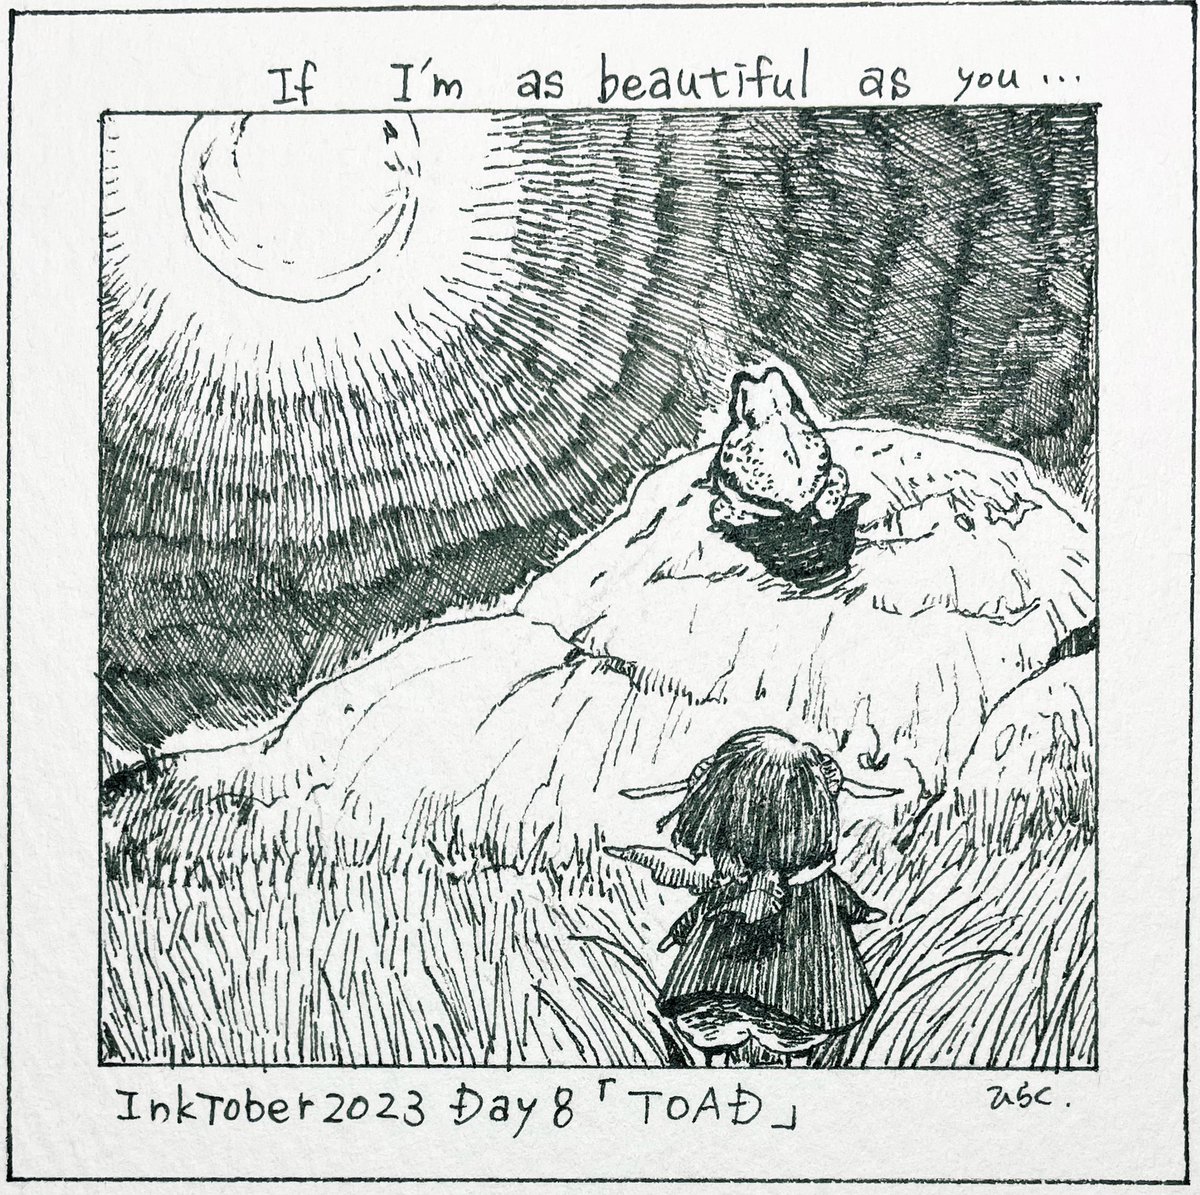 10/8: TOAD 「もしも私があなたのように美しければ…」 月に恋したヒキガエルのお話。  "If I'm as beautiful as you..." A story about a toad who fell in love with the moon.   #inktober2023 #inktober2023day8 #Pavot #ペン画